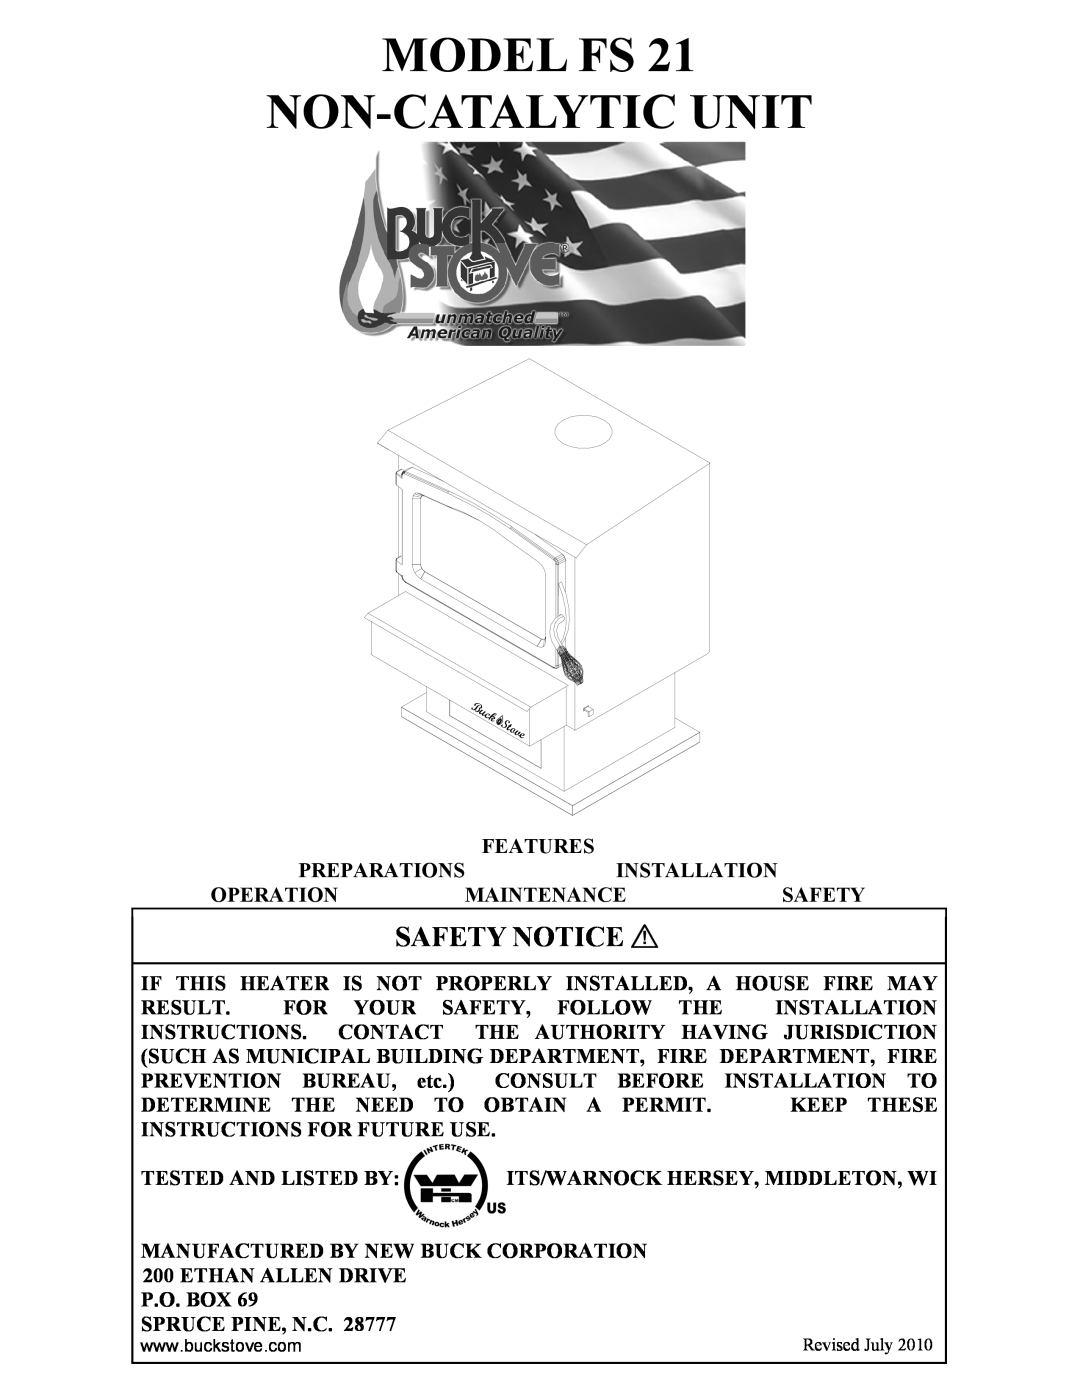 New Buck Corporation FS 21 installation instructions Model Fs Non-Catalyticunit, Safety Notice 